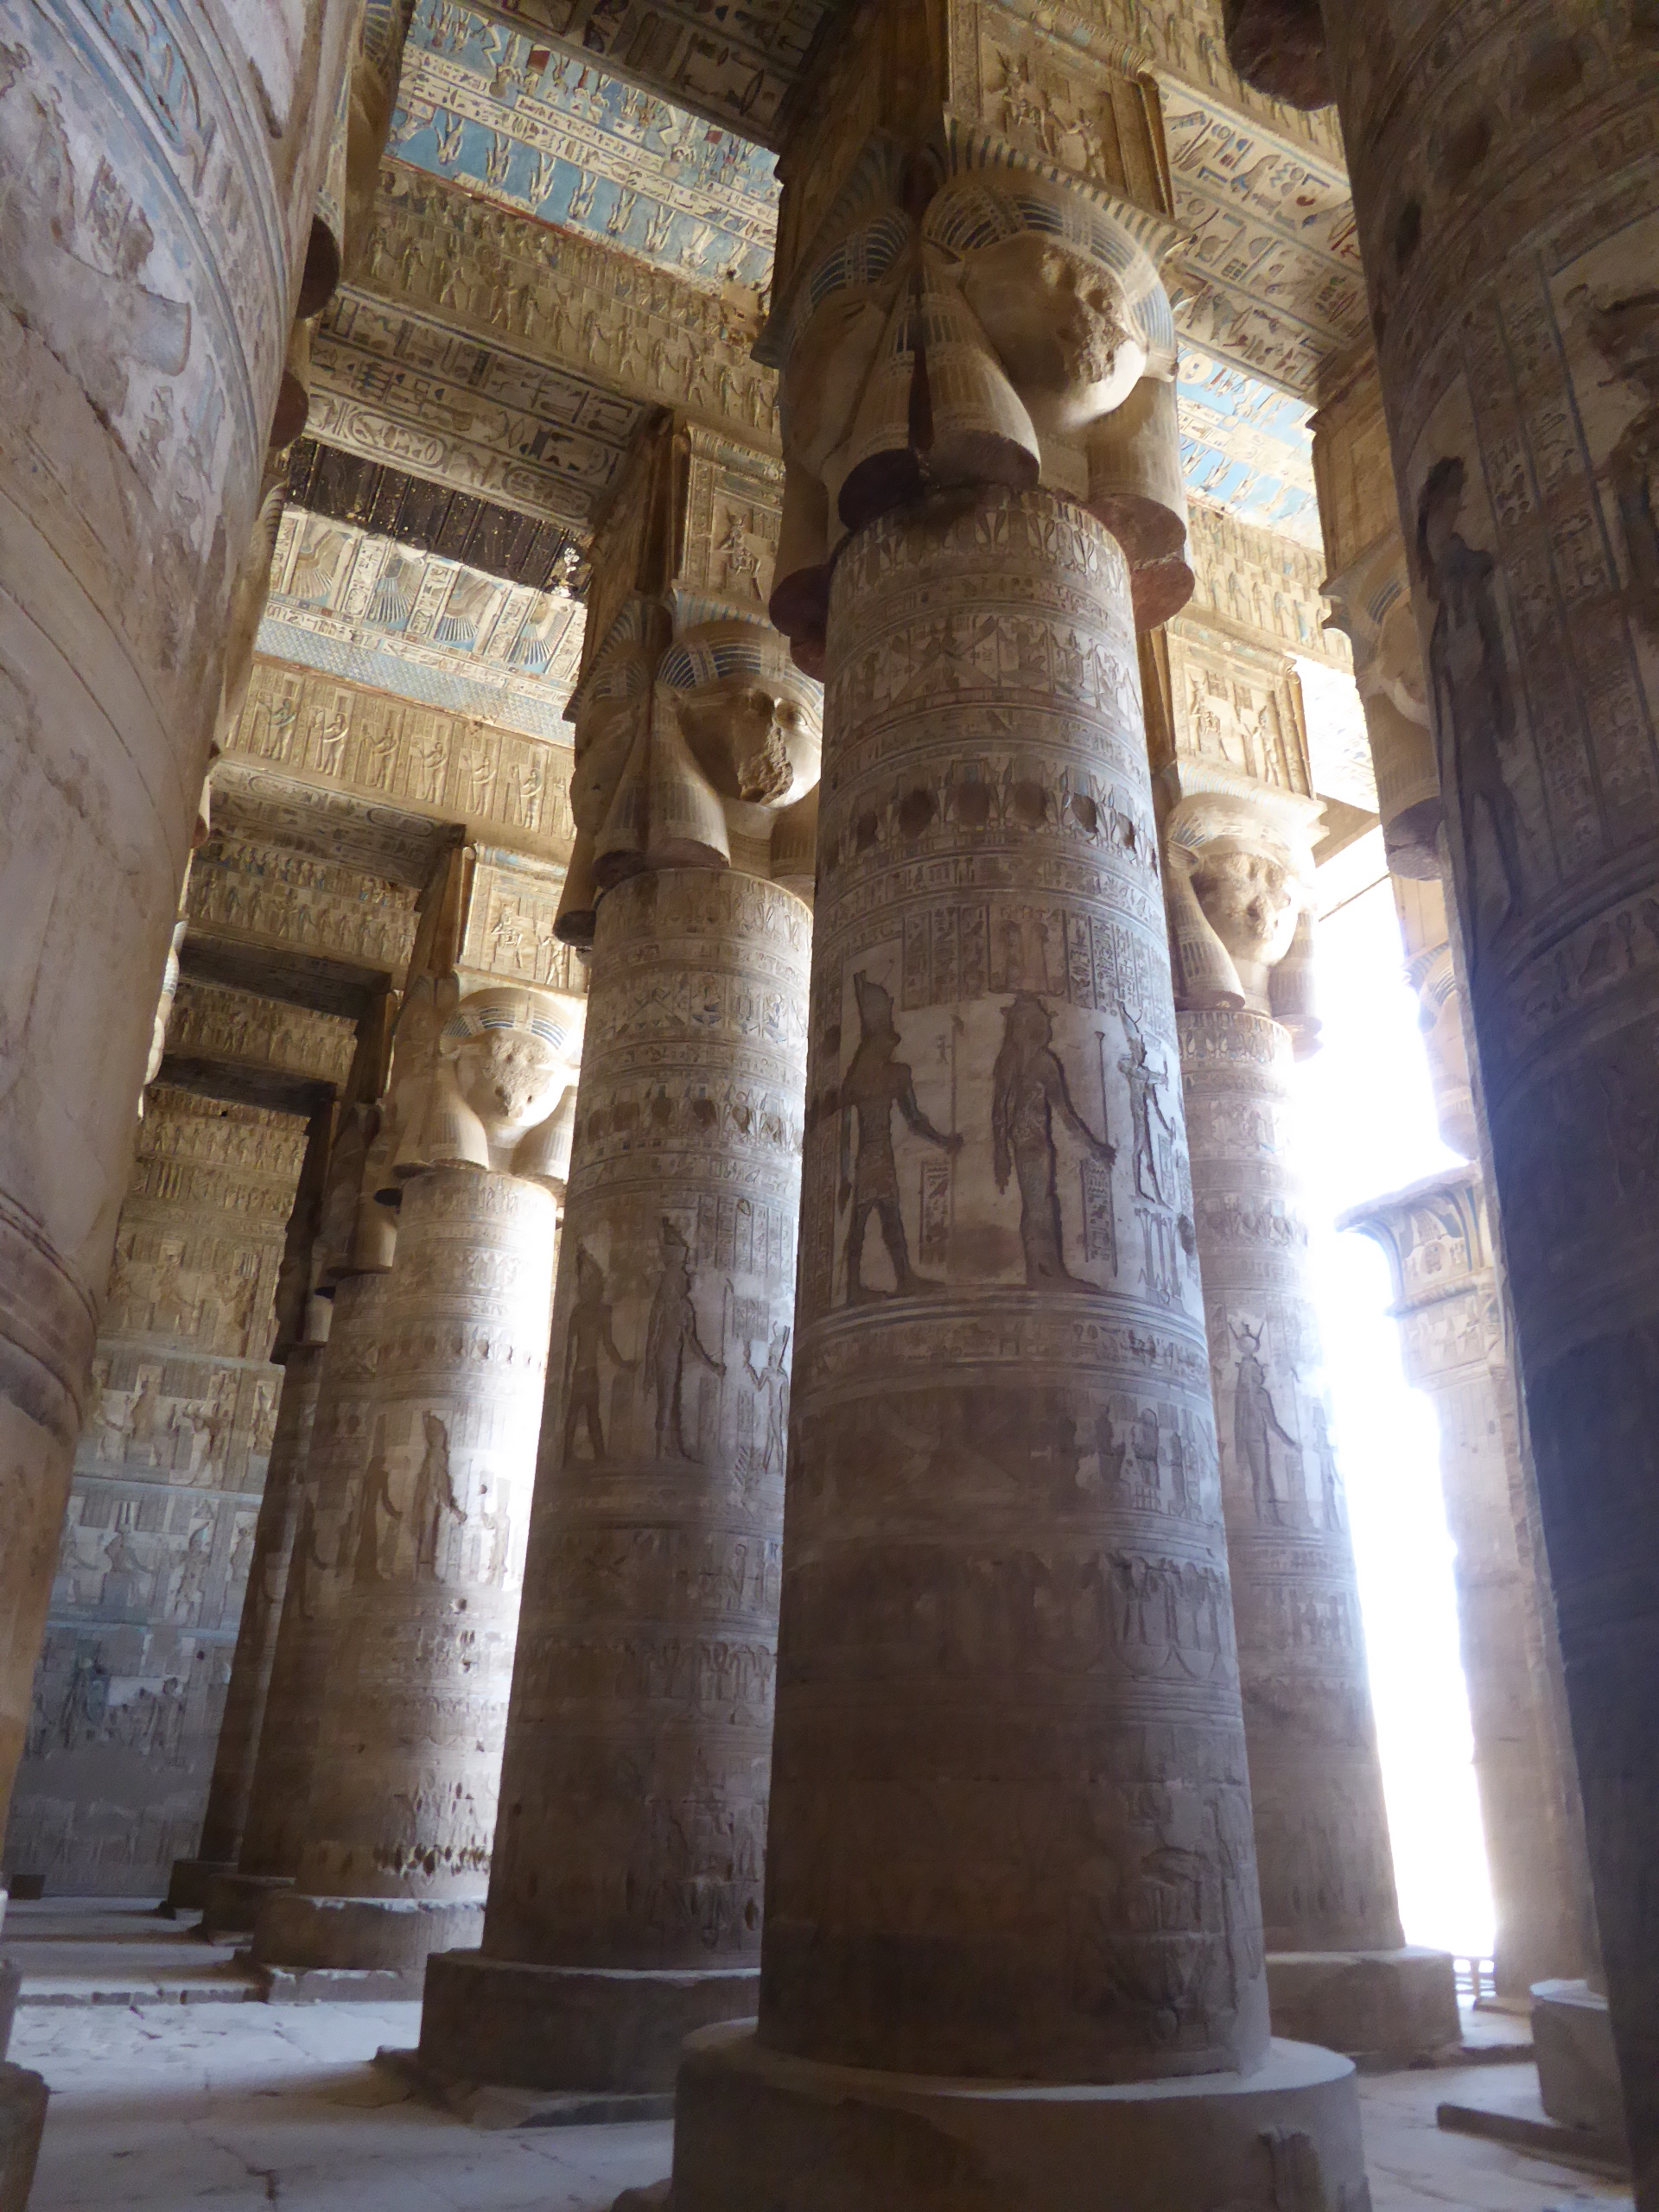 Hypostyle Hall, Dendera Temple The Temple of Hathor at Dendera is one of Egypt's best preserved and most beautiful ancient shrines. This magnificent edifice dates to the Ptolemaic period, late in Egyptian history, though the site long had been the cult centre for the goddess Hathor for centuries before (the earliest extant remains date to c360BC but a temple is recorded here as far back as c2250BC). Most of the main building dates to the reigns of the last Cleopatras and further decoration and building work within the complex continued in the Roman period up to the reign of Trajan. The dominant structure in the complex is the Temple of Hathor, an enormous structure with a rectangular facade punctuated by the Hathor-headed columns of the hypostyle hall within. This hall is an architectural wonder, a masterpiece of ancient Egyptian design and decoration, which covers every surface and has been recently cleaned, revealing a superb astrological ceiling in all its original vibrant colours. Sadly there was much iconoclasm here during the early Christian period and most of the reliefs of the walls and pillars have been defaced. Worse still is the damage to the 24 Hathor-head capitals: not one of the nearly a hundred huge faces of the goddess that once smiled down on this hall has been left unblemished, most with their features cruelly chiselled away. The main temple building is otherwise structurally intact, and extends into further halls and chapels beyond, again with much relief decoration (much of which is again defaced). In one corner is an entrance to a crypt below, an unusual feature in Egyptian temple architecture consisting of several narrow passages adorned with carved relief decoration in good condition. There are further sanctuaries and chapels above on the roof of the temple, accessed by a decorated staircase and including the room where the famous Dendera Zodiac was formerly located (today its place in the ceiling taken by a cast of the original, now displayed in Paris). The highest part of the roof complex is no longer accessible to tourists, but I can still recall making the ascent there on our first visit in 1992. Several other buildings surround the main temple, the most impressive of which is the mammisi or 'birth-house'. This consists of a large rectangluar hall surrounded by a colonnade near the entrance to the site and has some well preserved relief decoration on its exterior. Most of this structure dates to the Roman period, but the ruins of its predecessor built under Nectanebo II (Egypt's last native pharoah) stand nearby. Dendera temple is one of the most rewarding in Egypt and shouldn't be missed. It is one of the most complete and evocative ancient monuments in the country and its recent restoration has revealed a surprisingly extensive amount of colour surviving within (we were amazed by the dramatic contrast with the soot-blackened ceiling we'd beheld on our previous visit in the 1990s). Despite its relative youth (in Egyptian terms at least!) it is easily one of my favourite sites in Egypt. en.wikipedia.org/wiki/Dendera_Temple_complex